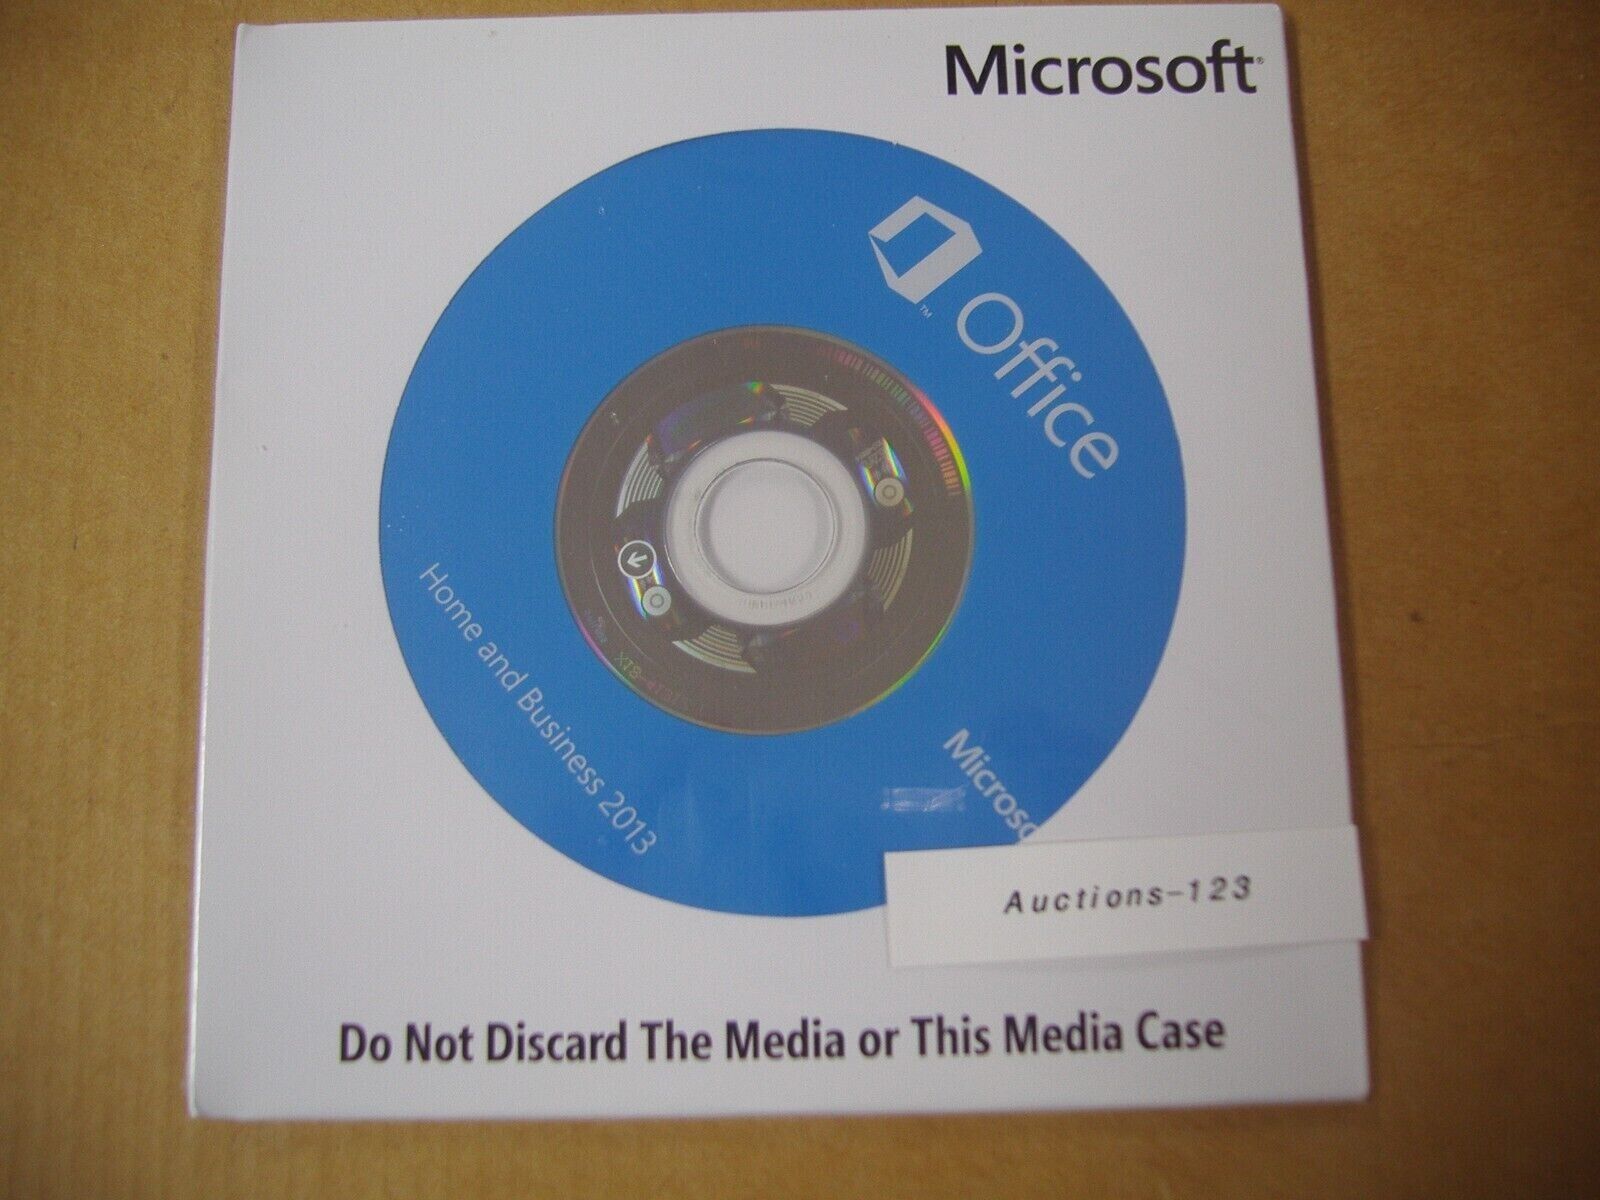 MS Microsoft Office 2013 Home and Business Full English Version DVD =NEW SEALED=